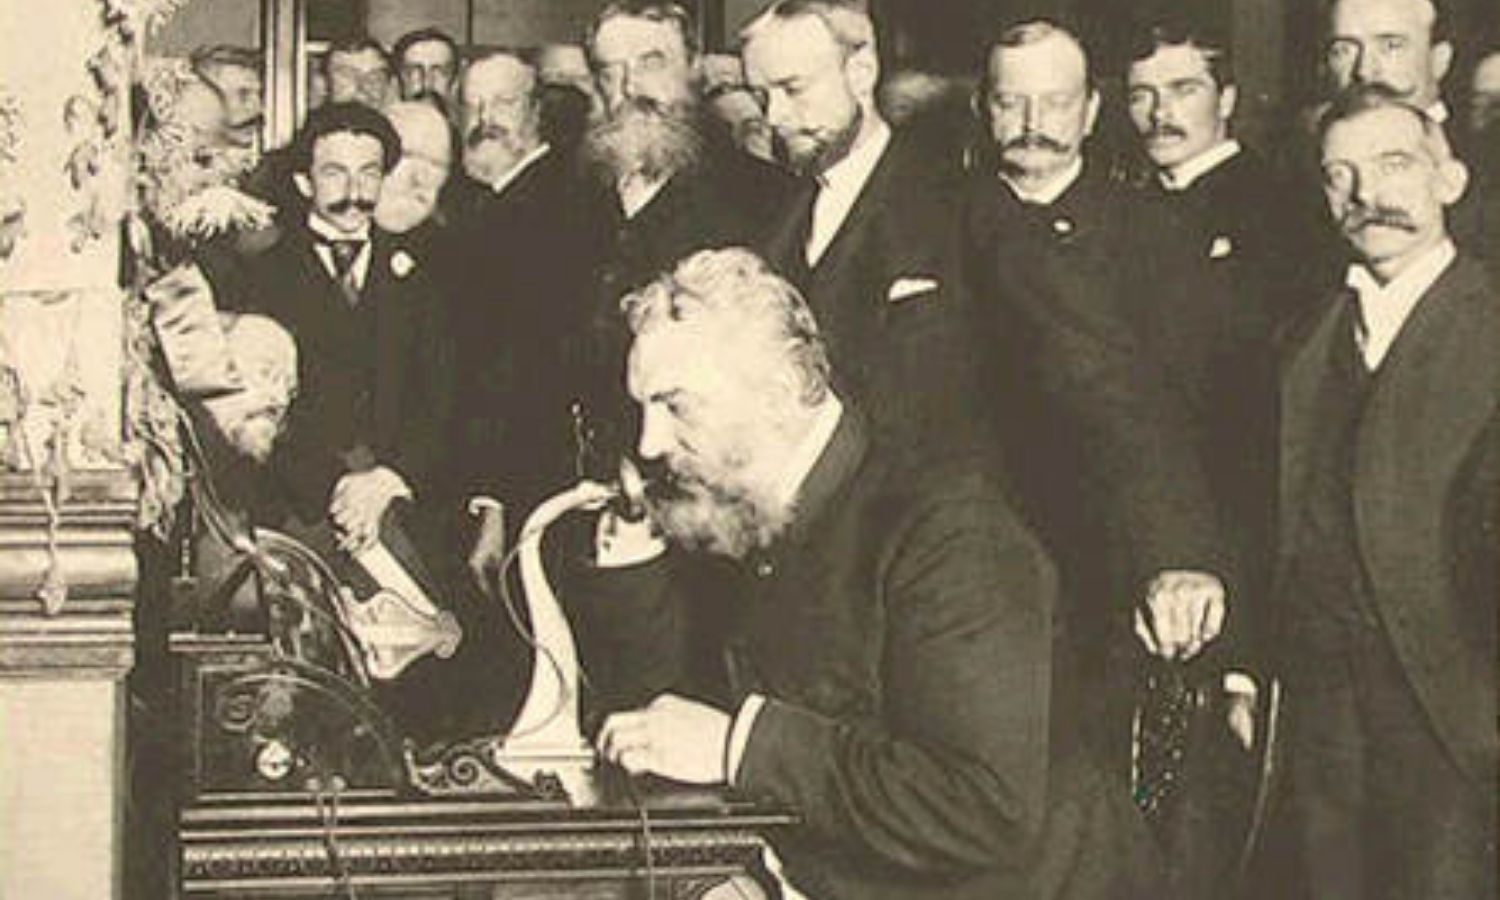 OTD in 1926: The first telephone call was made across the Atlantic - from London to New York.